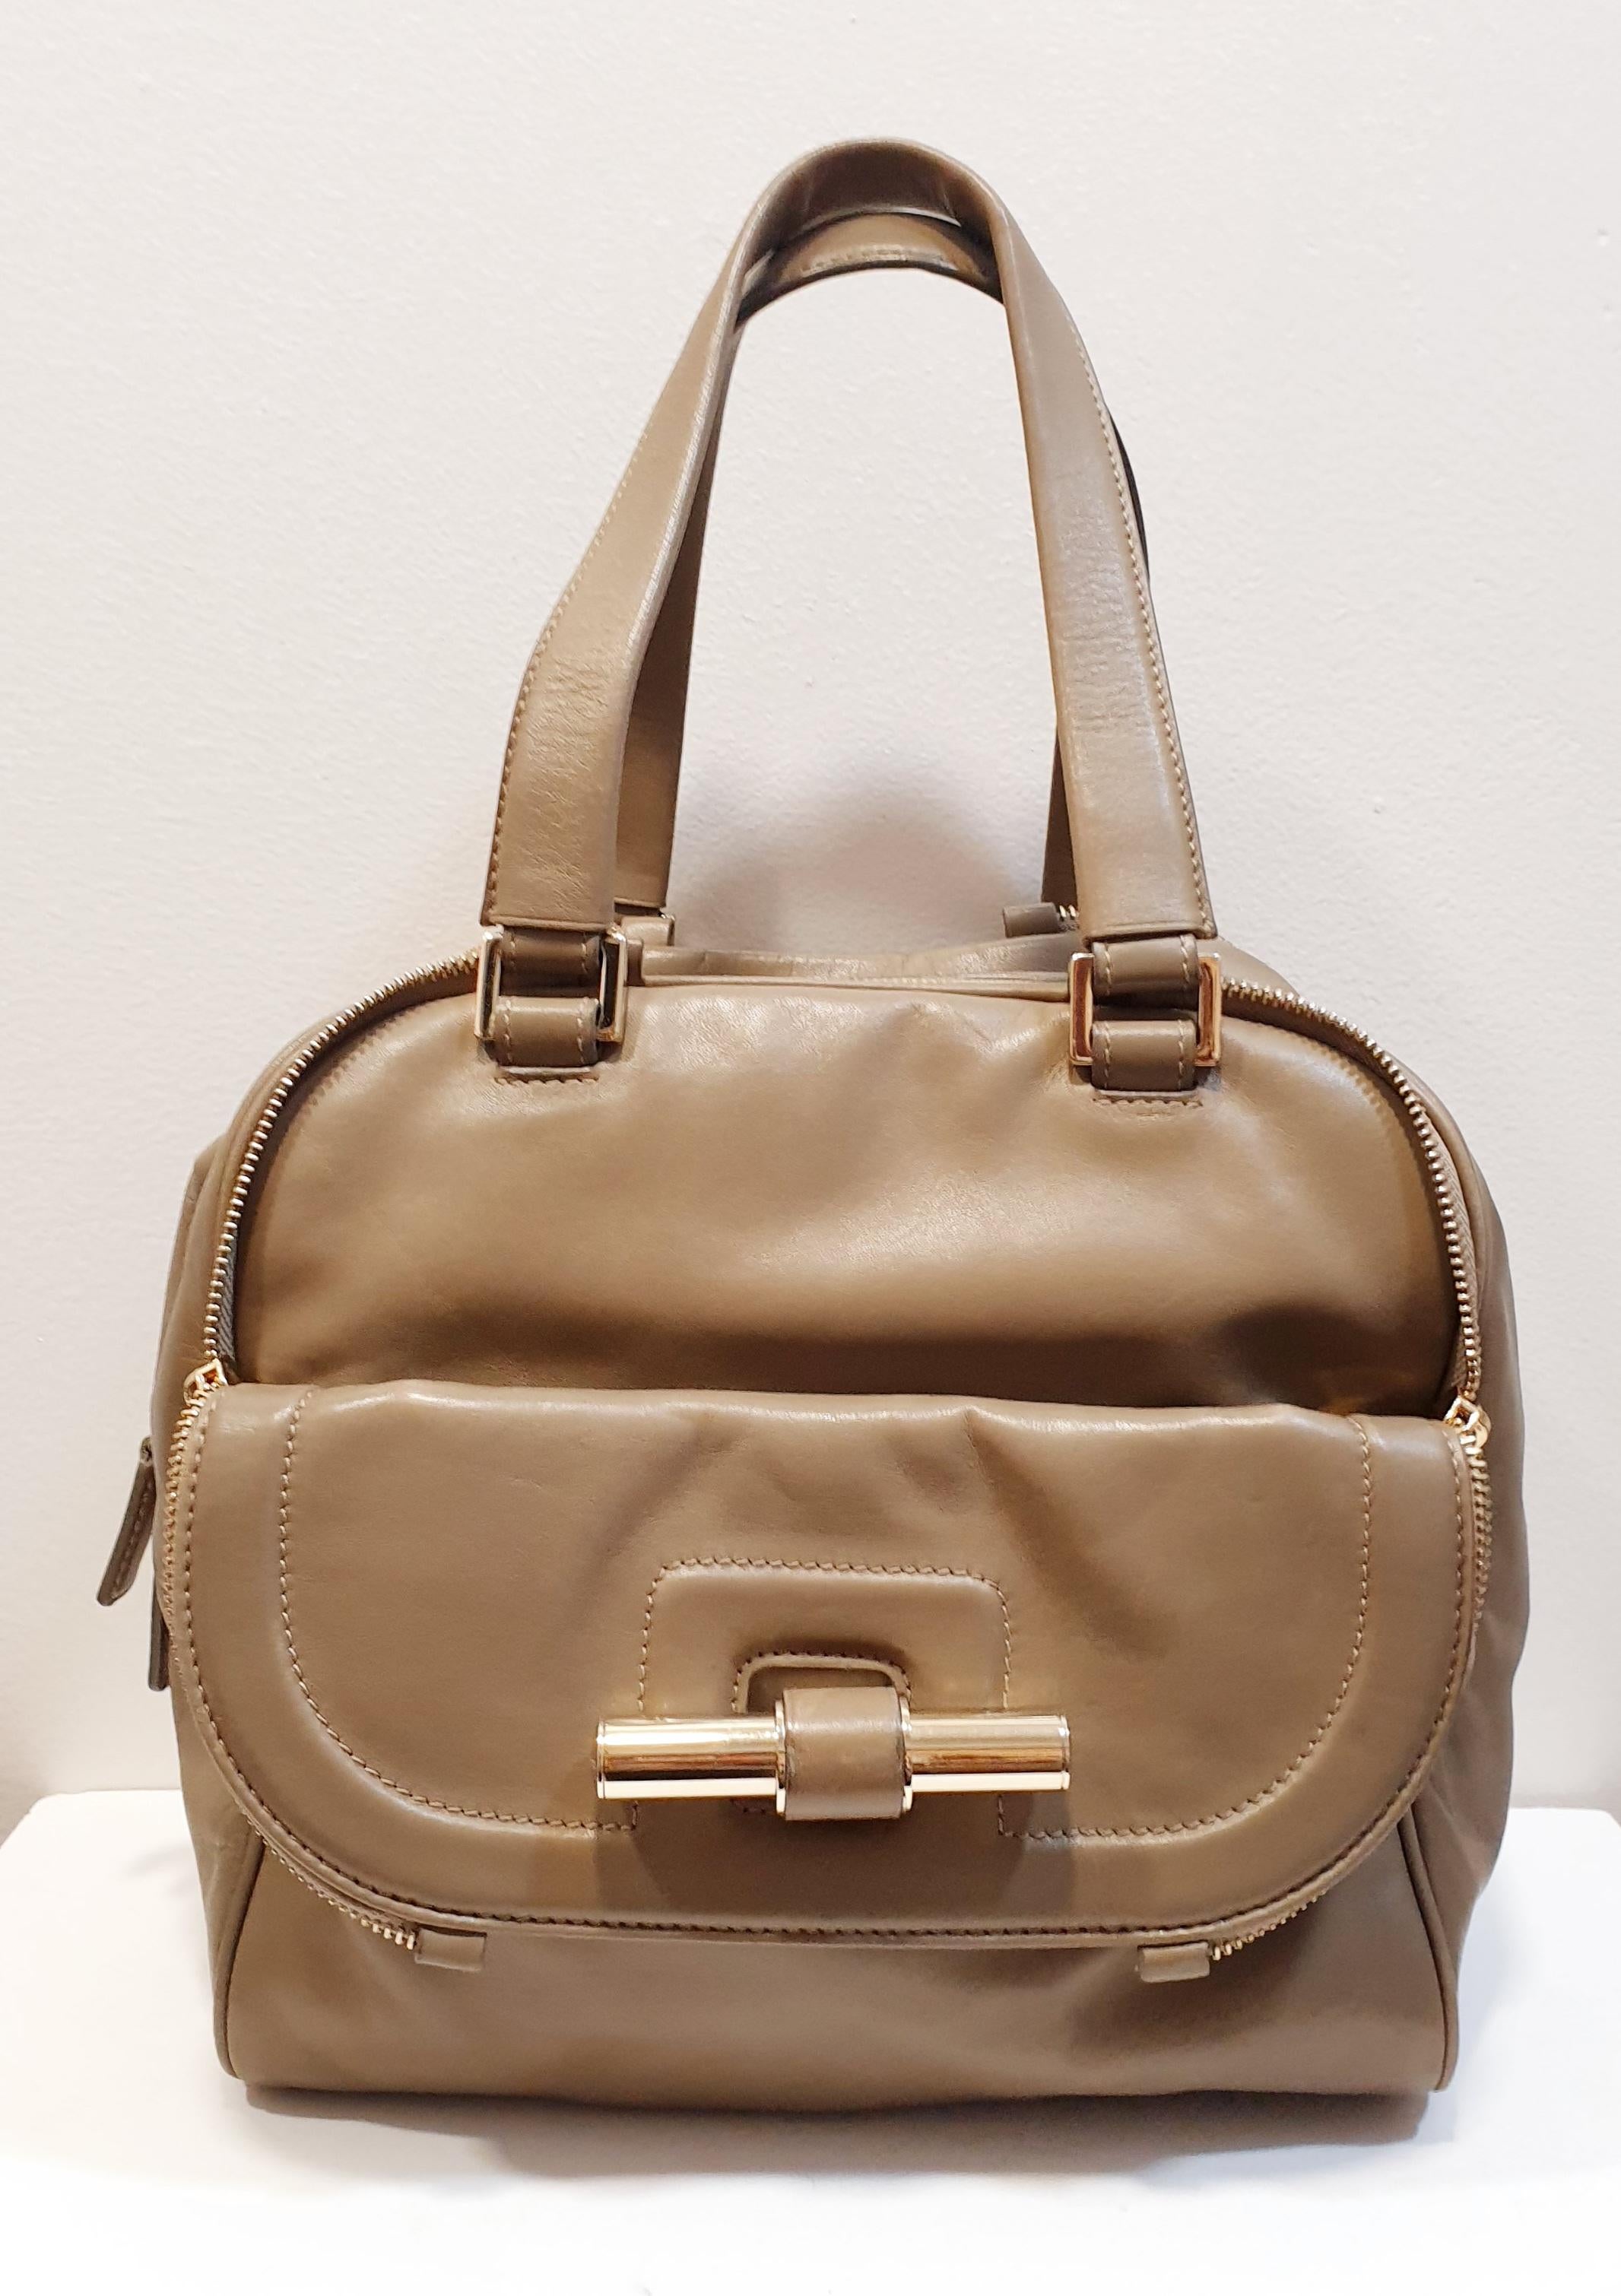 JIMMY CHOO bag Boston Justine model in taupe
 Taupe leather, gold trim, two flat leather handles, front patch pocket and flap pocket with zip, double top zip, beige canvas lining, one inside zip pocket.

Width: 25 cm  9,84 inches
Height: 23 cm  9,05